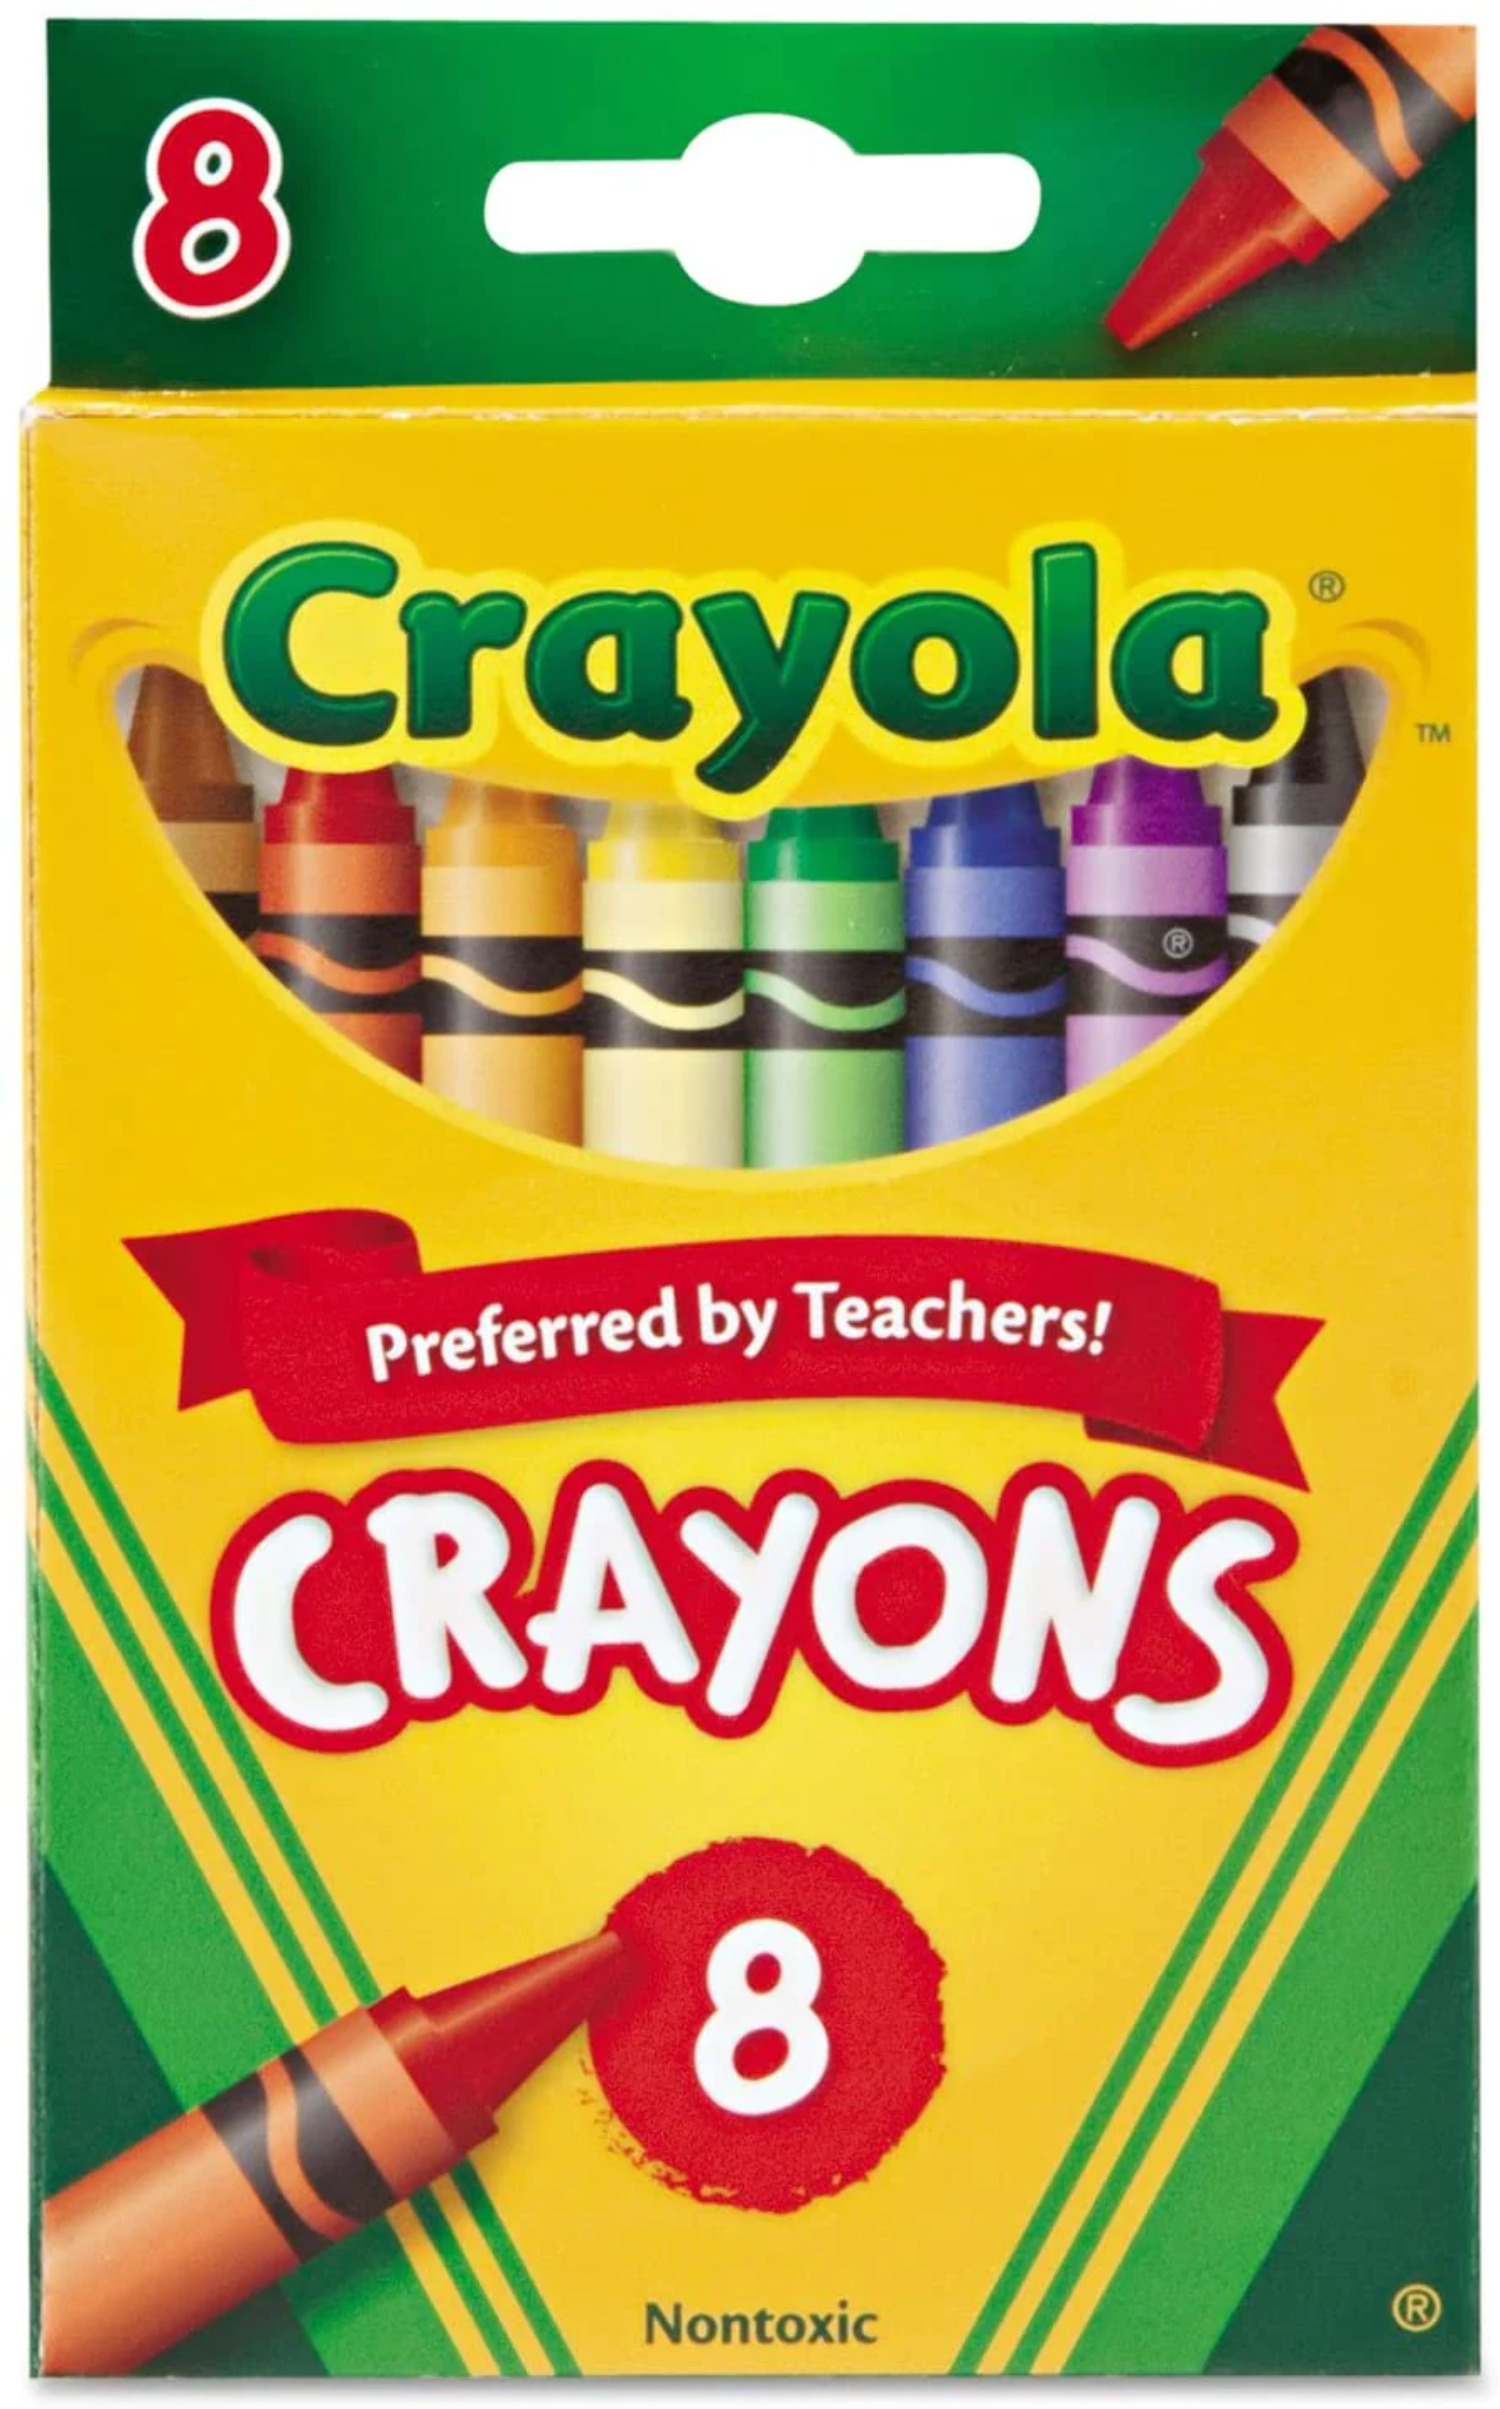 (4 pack) Crayola Classic Crayons, Back to School Supplies for Kids, 8 Ct, Art Supplies - image 3 of 7